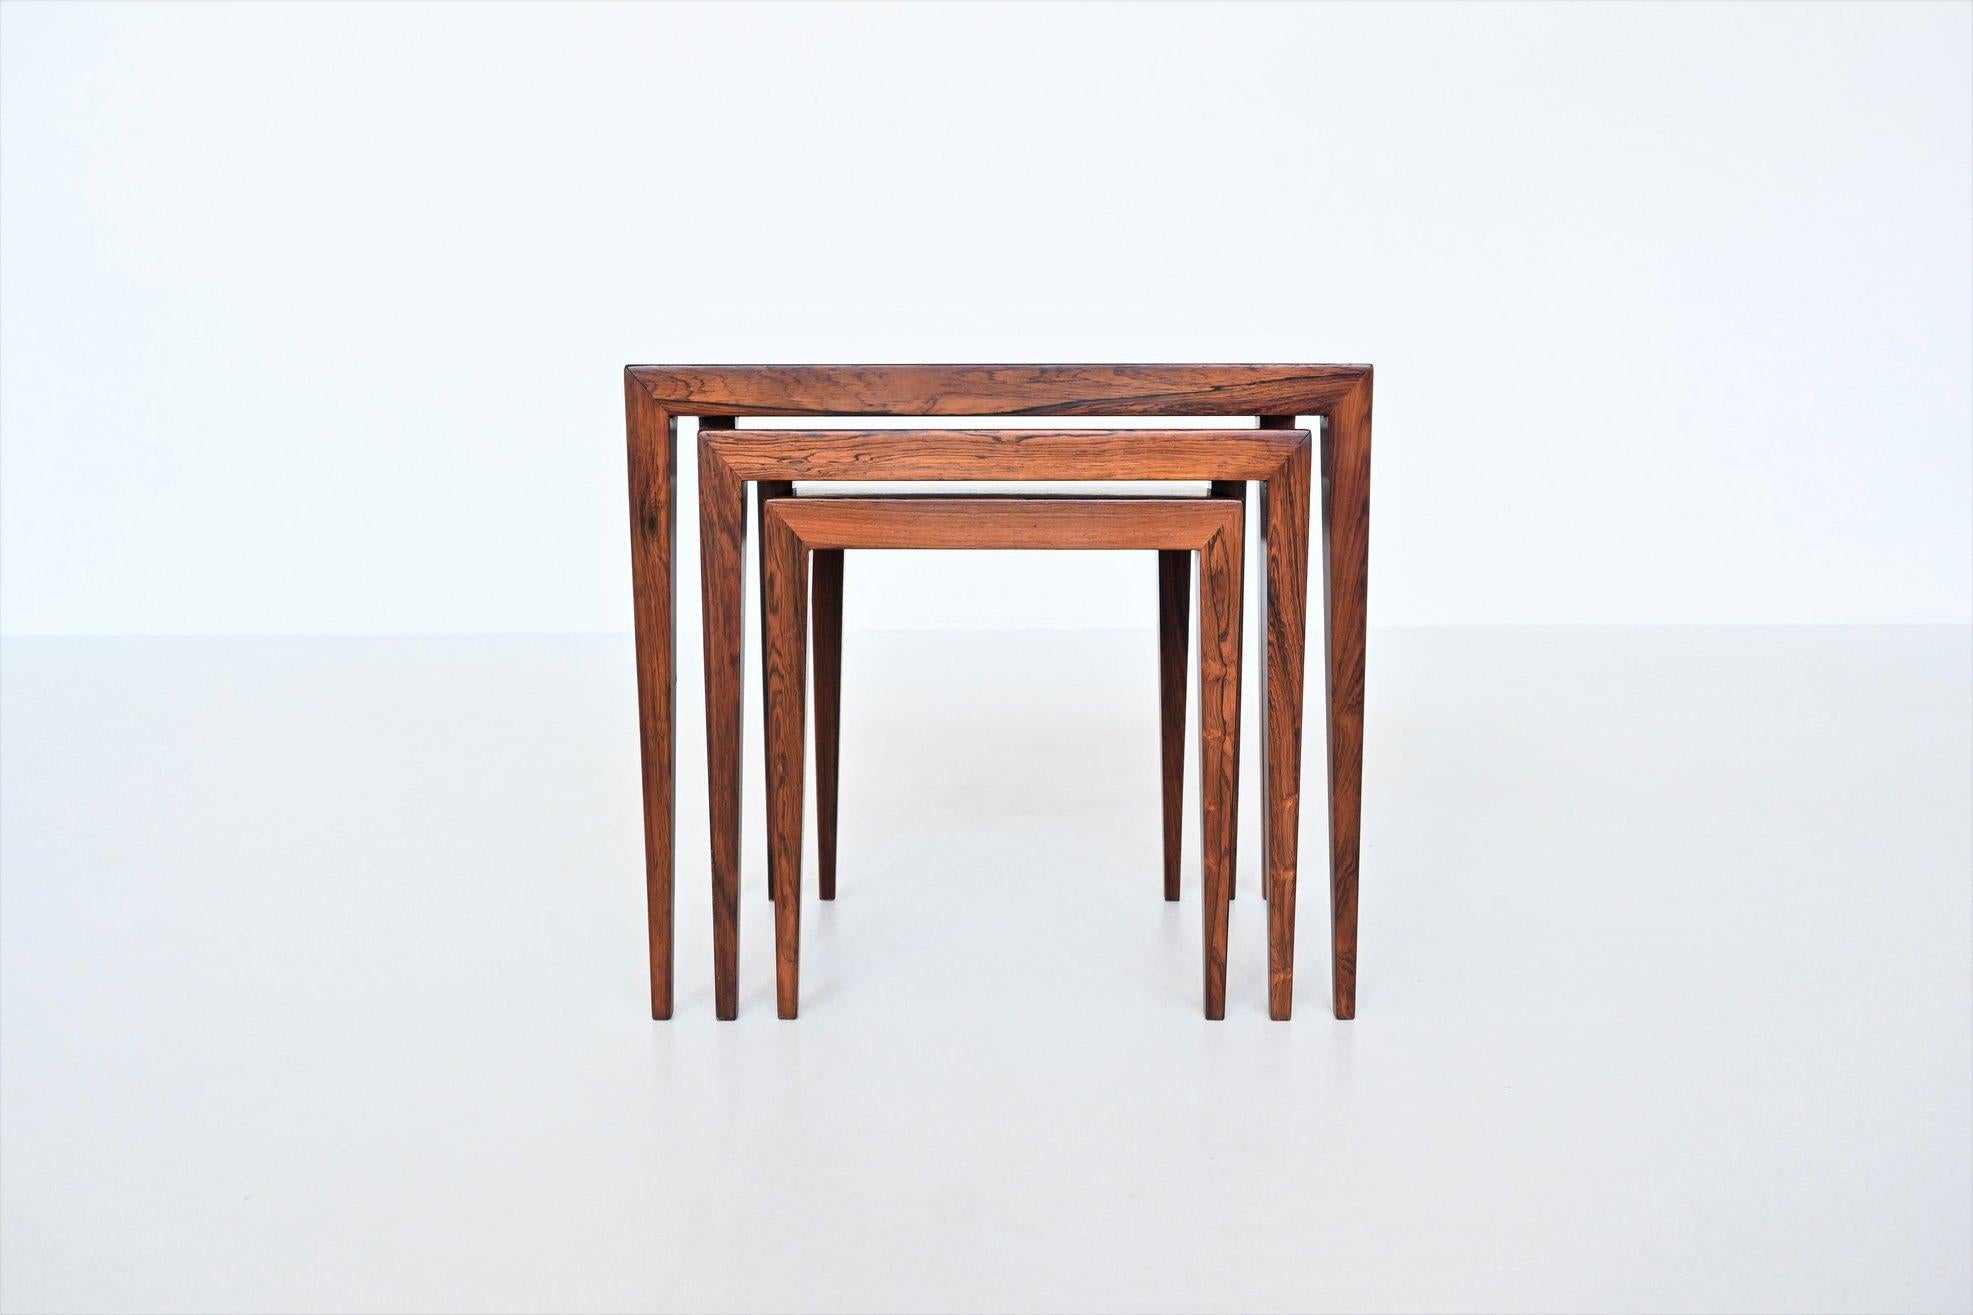 Beautiful shaped set of three nesting tables model 163 designed by Severin Hansen Jr. for Haslev Møbelsnedskeri, Denmark 1960. This sophisticated set of nesting tables is made of nice grained rosewood veneer. They give a minimalist look due to the